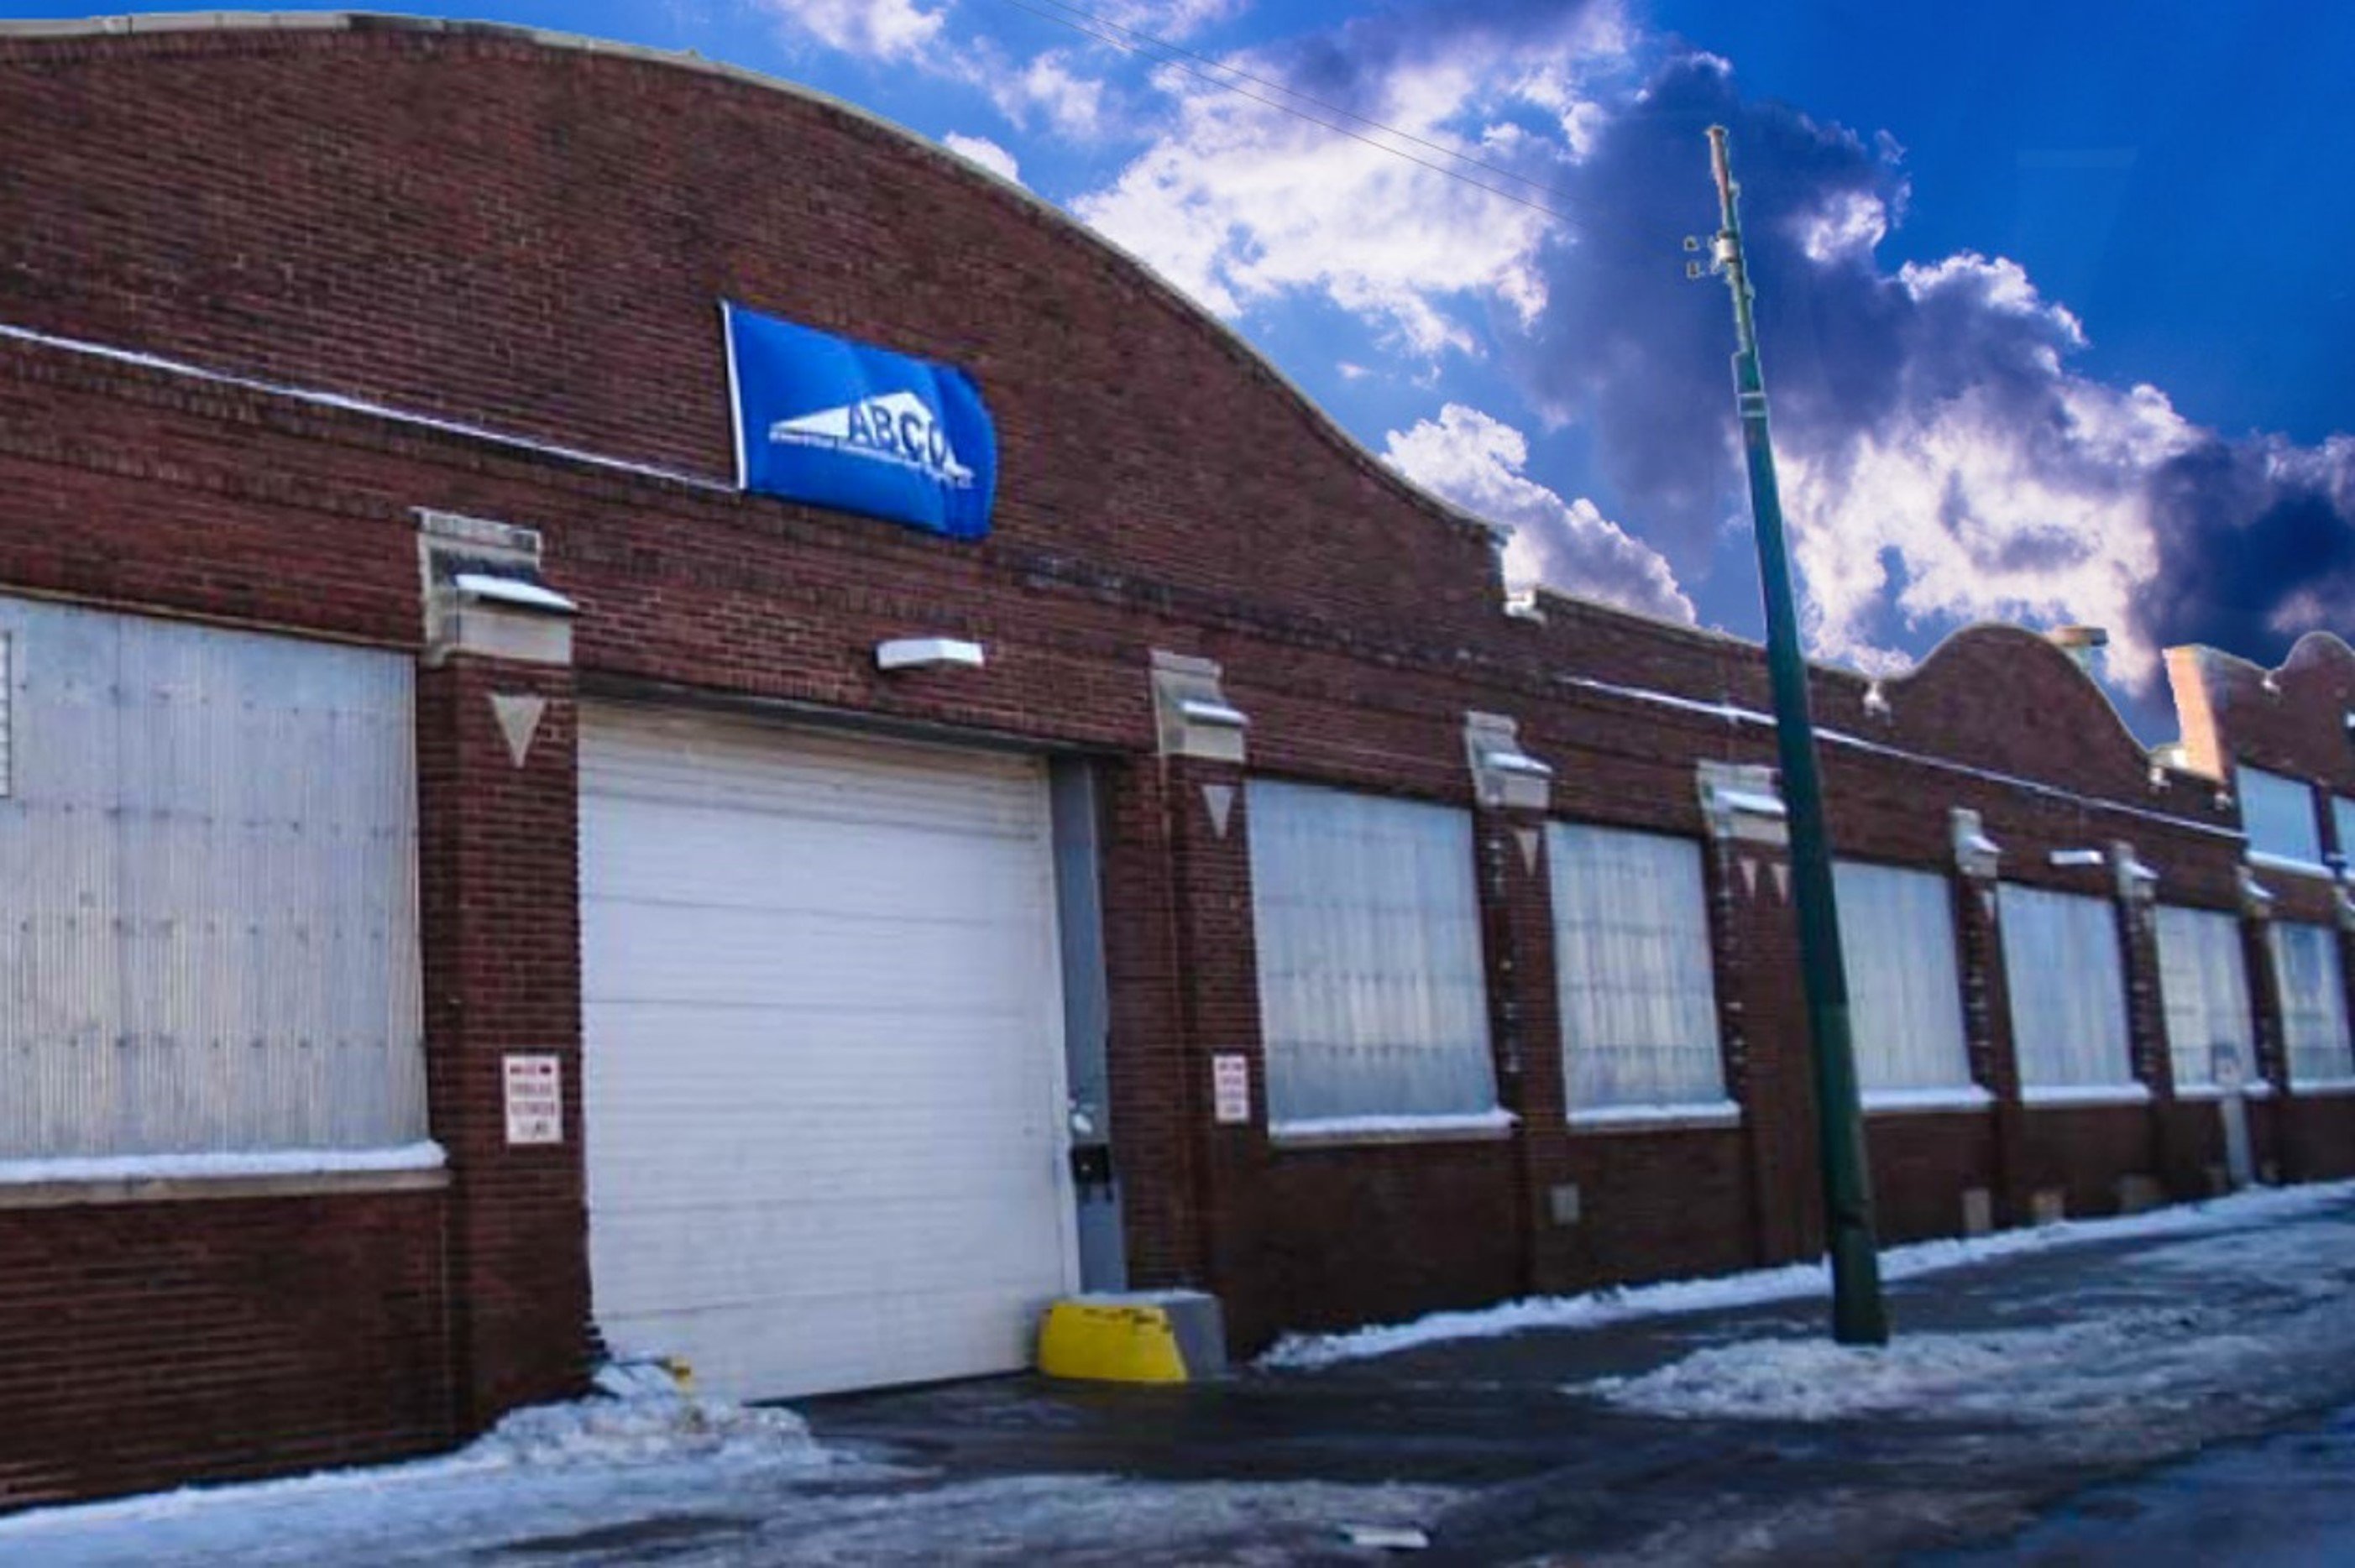 Avison Young brokers 44,000 square feet of industrial space in Chicago